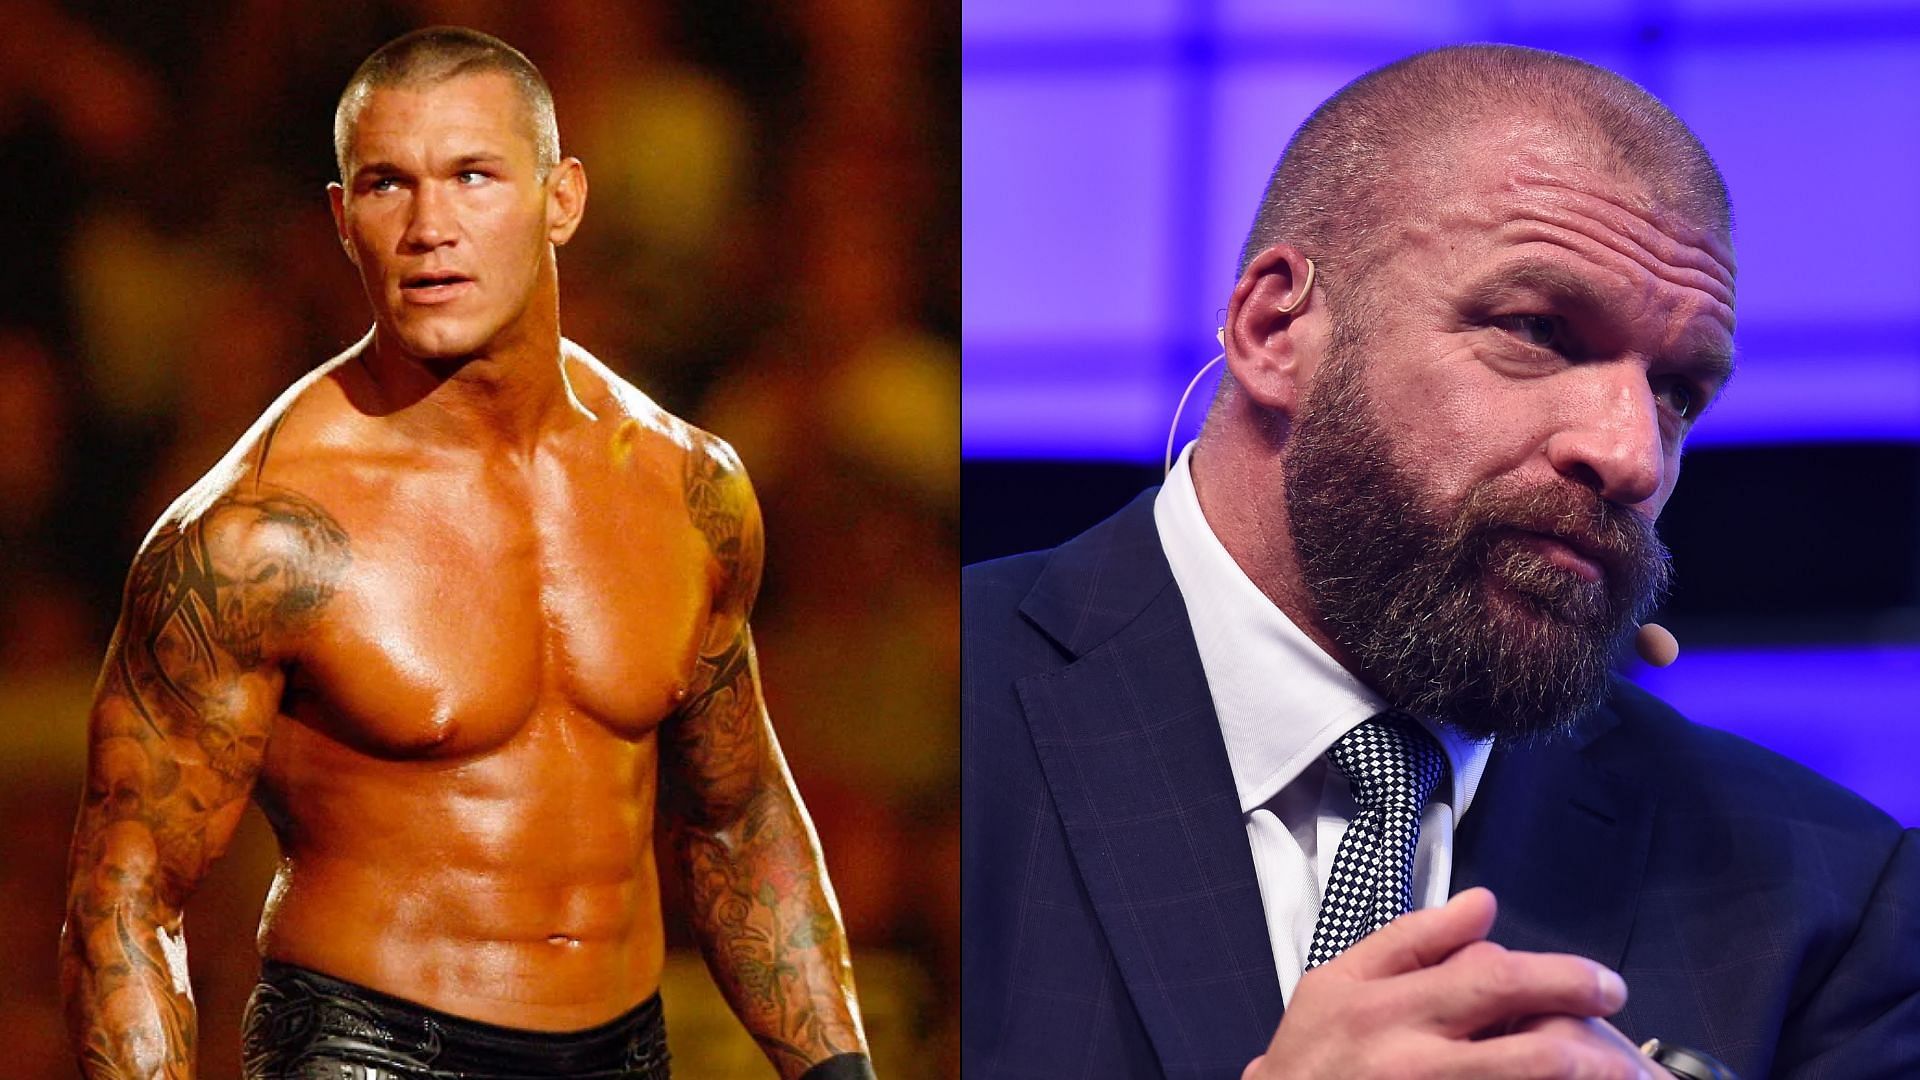 What were Randy Orton and Triple H roles in this week